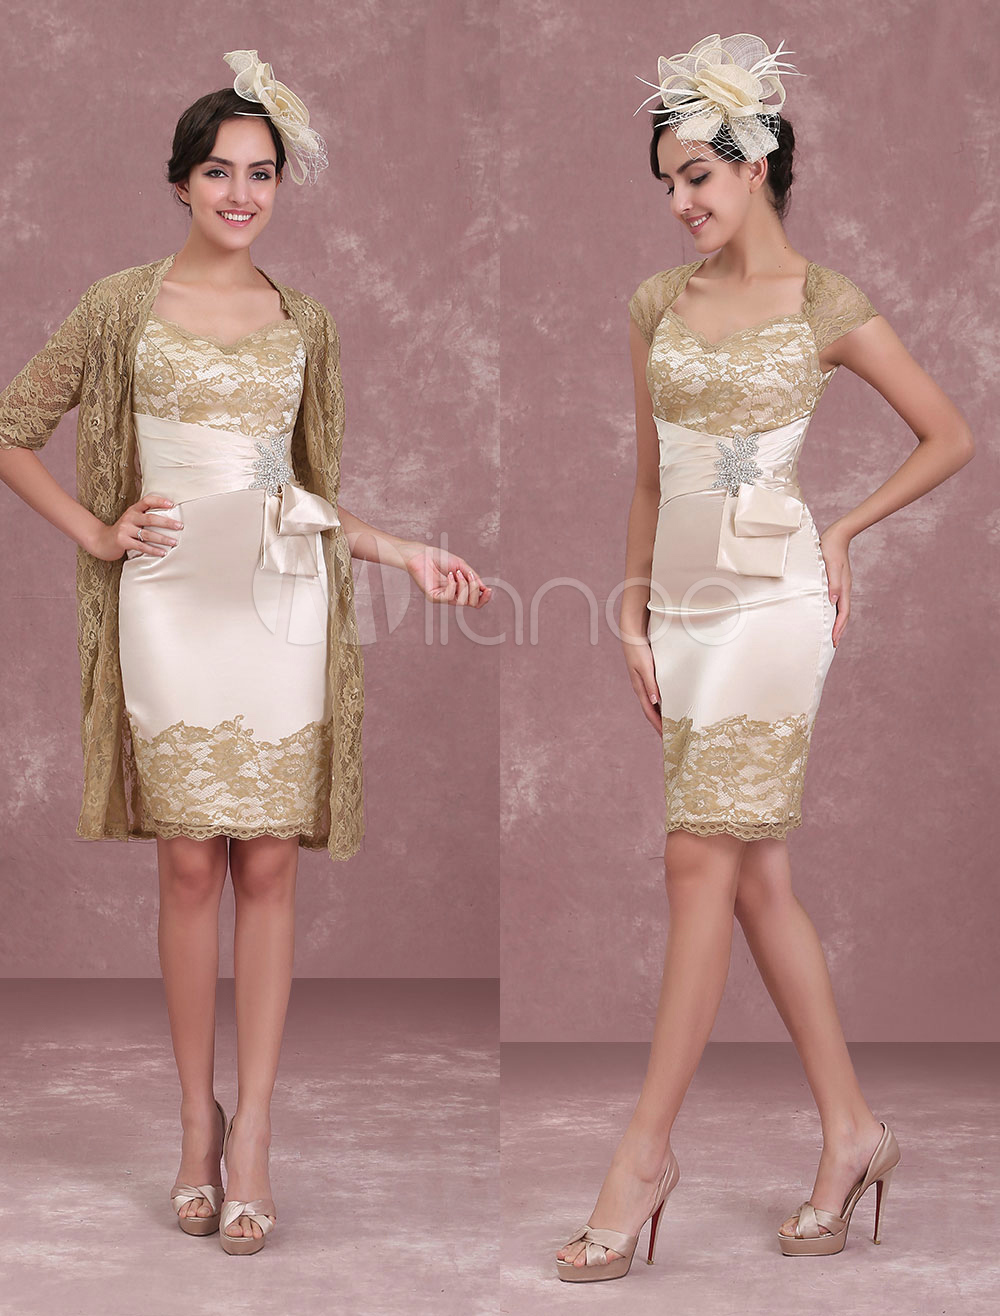 two piece dress for wedding guest